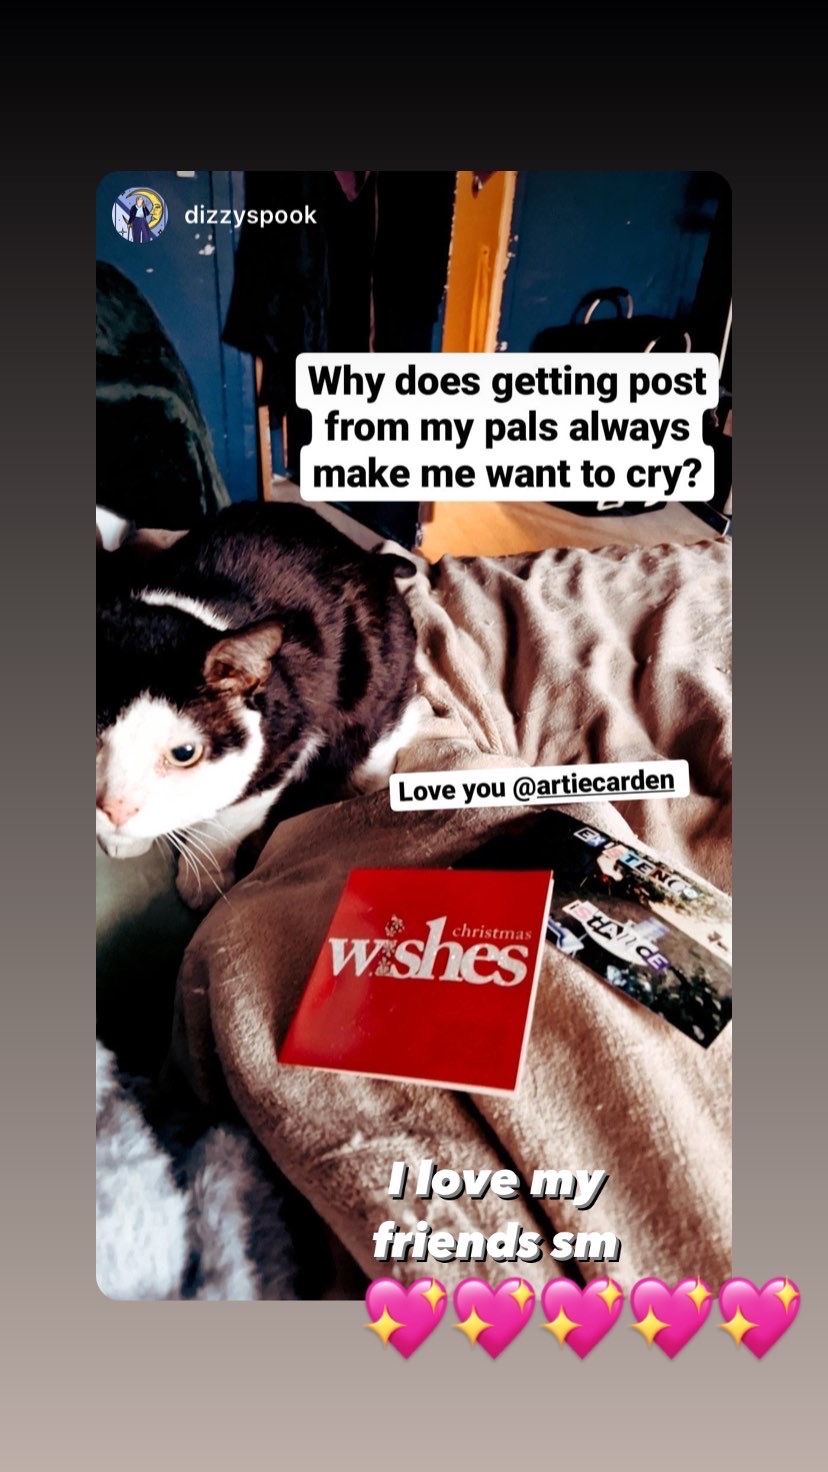 Ig story that shows DizzySpook's lap in bed, her black and white cat on the left and a christmas card and art piece on the bottom right. text reads 'why does getting post from my pals always make me want to cry' from DizzySpook, Artie shared and added 'i love my friends SM' with 5 sparkly pink heart emojis